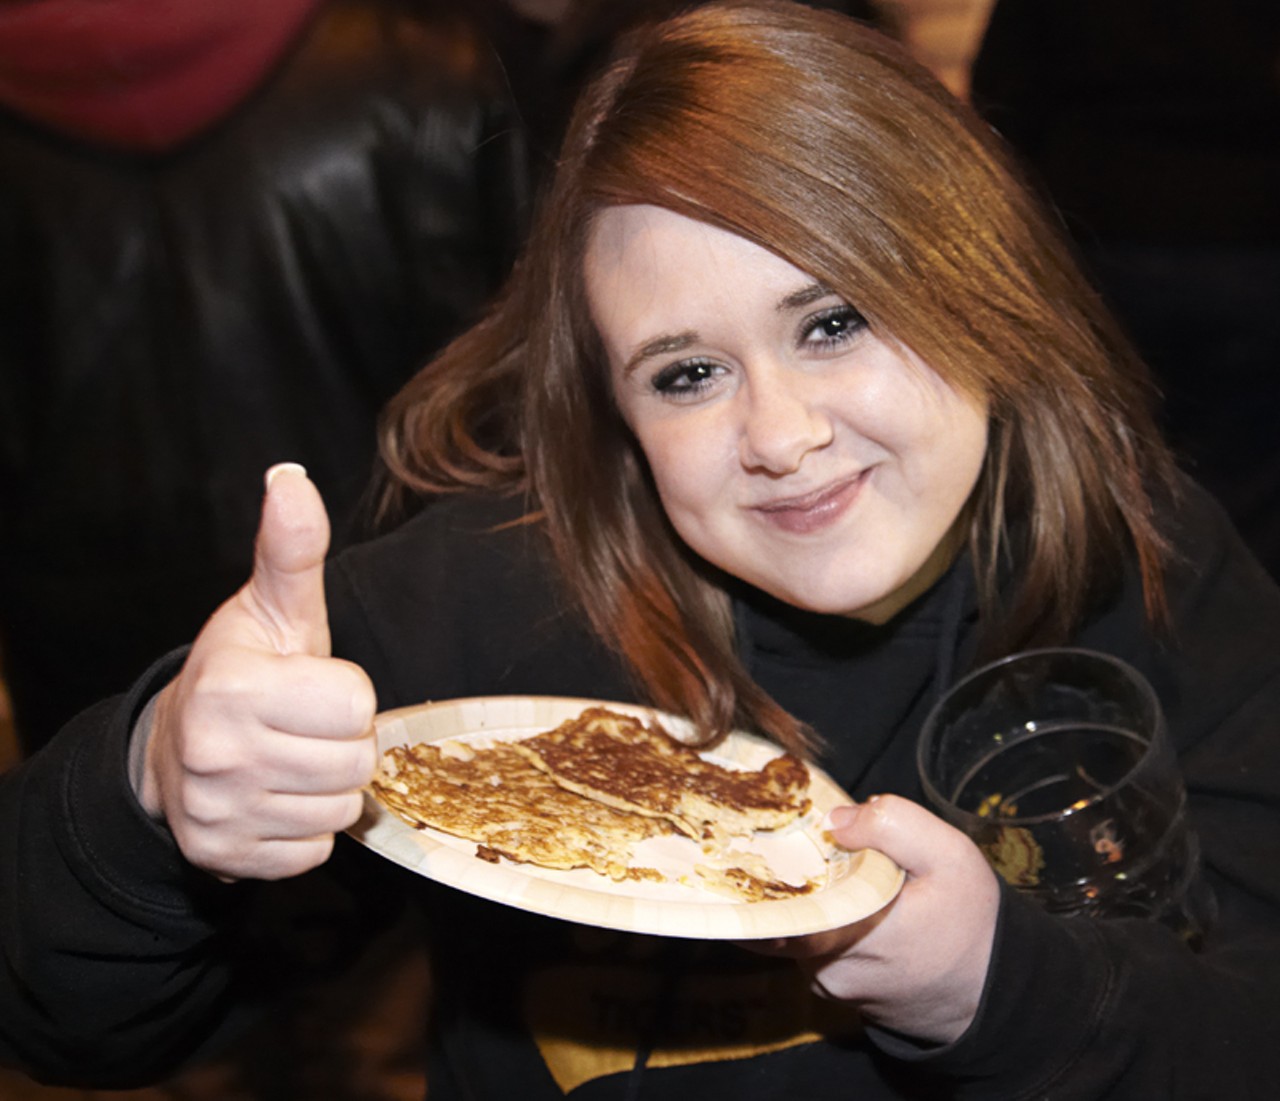 Tiffany gives a thumbs up for the potato pancakes.